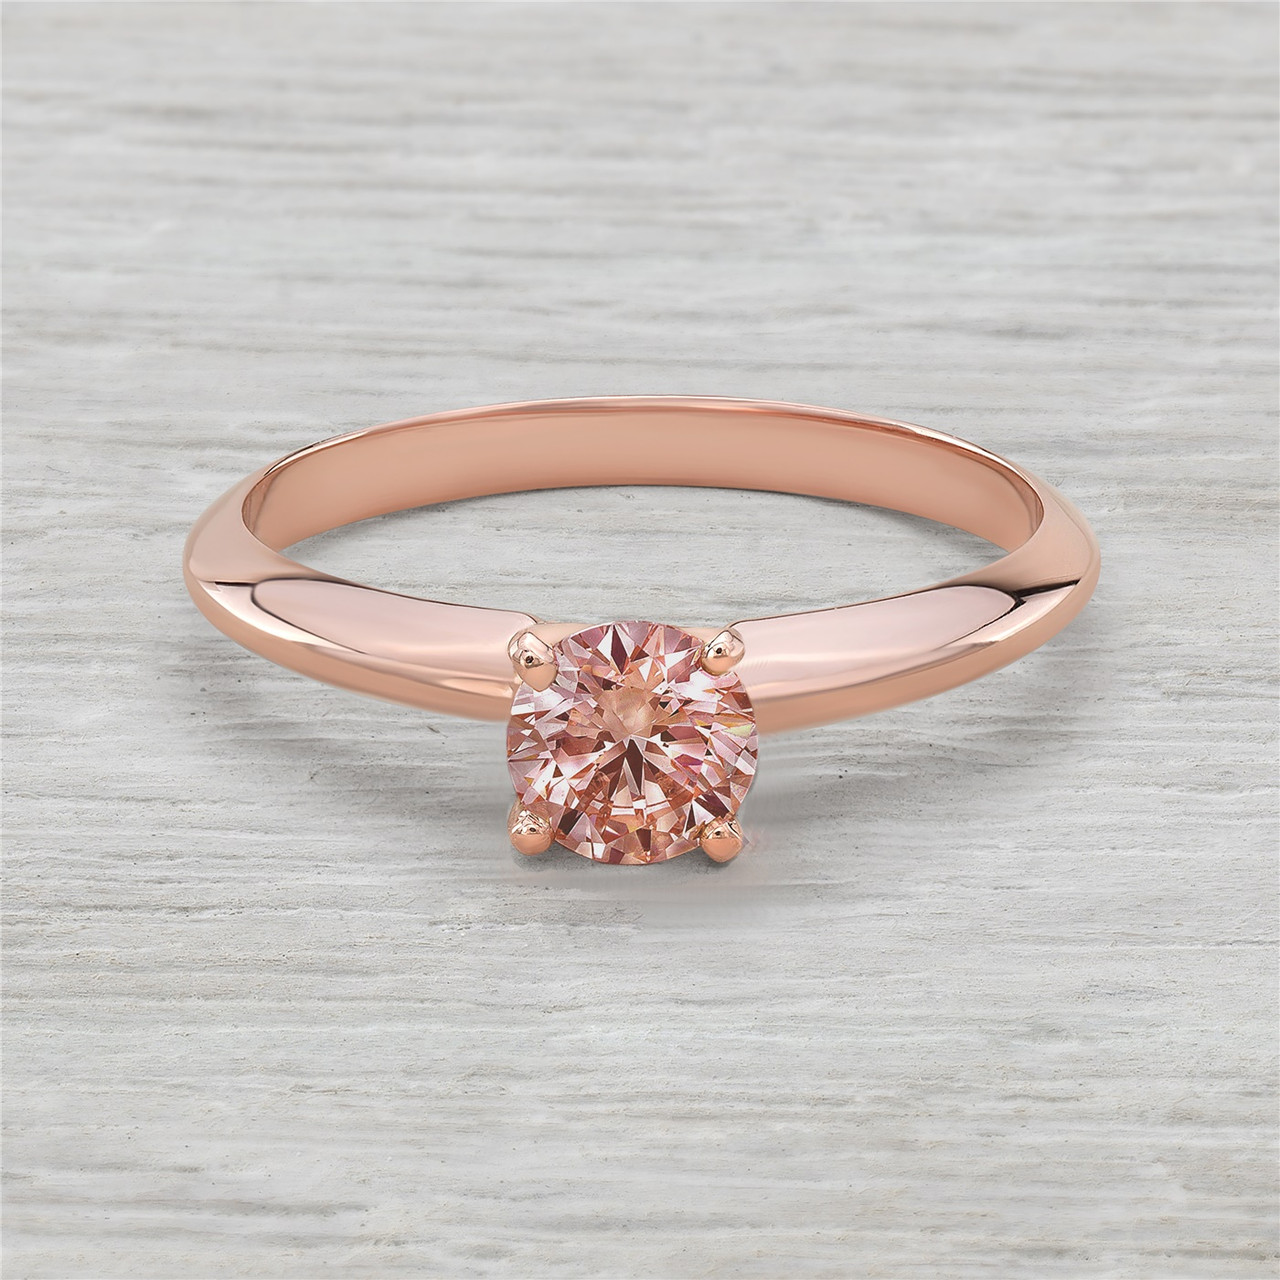 54ct Half Carat Pink Diamond Solitaire Engagement Ring In 14k Rose Gold